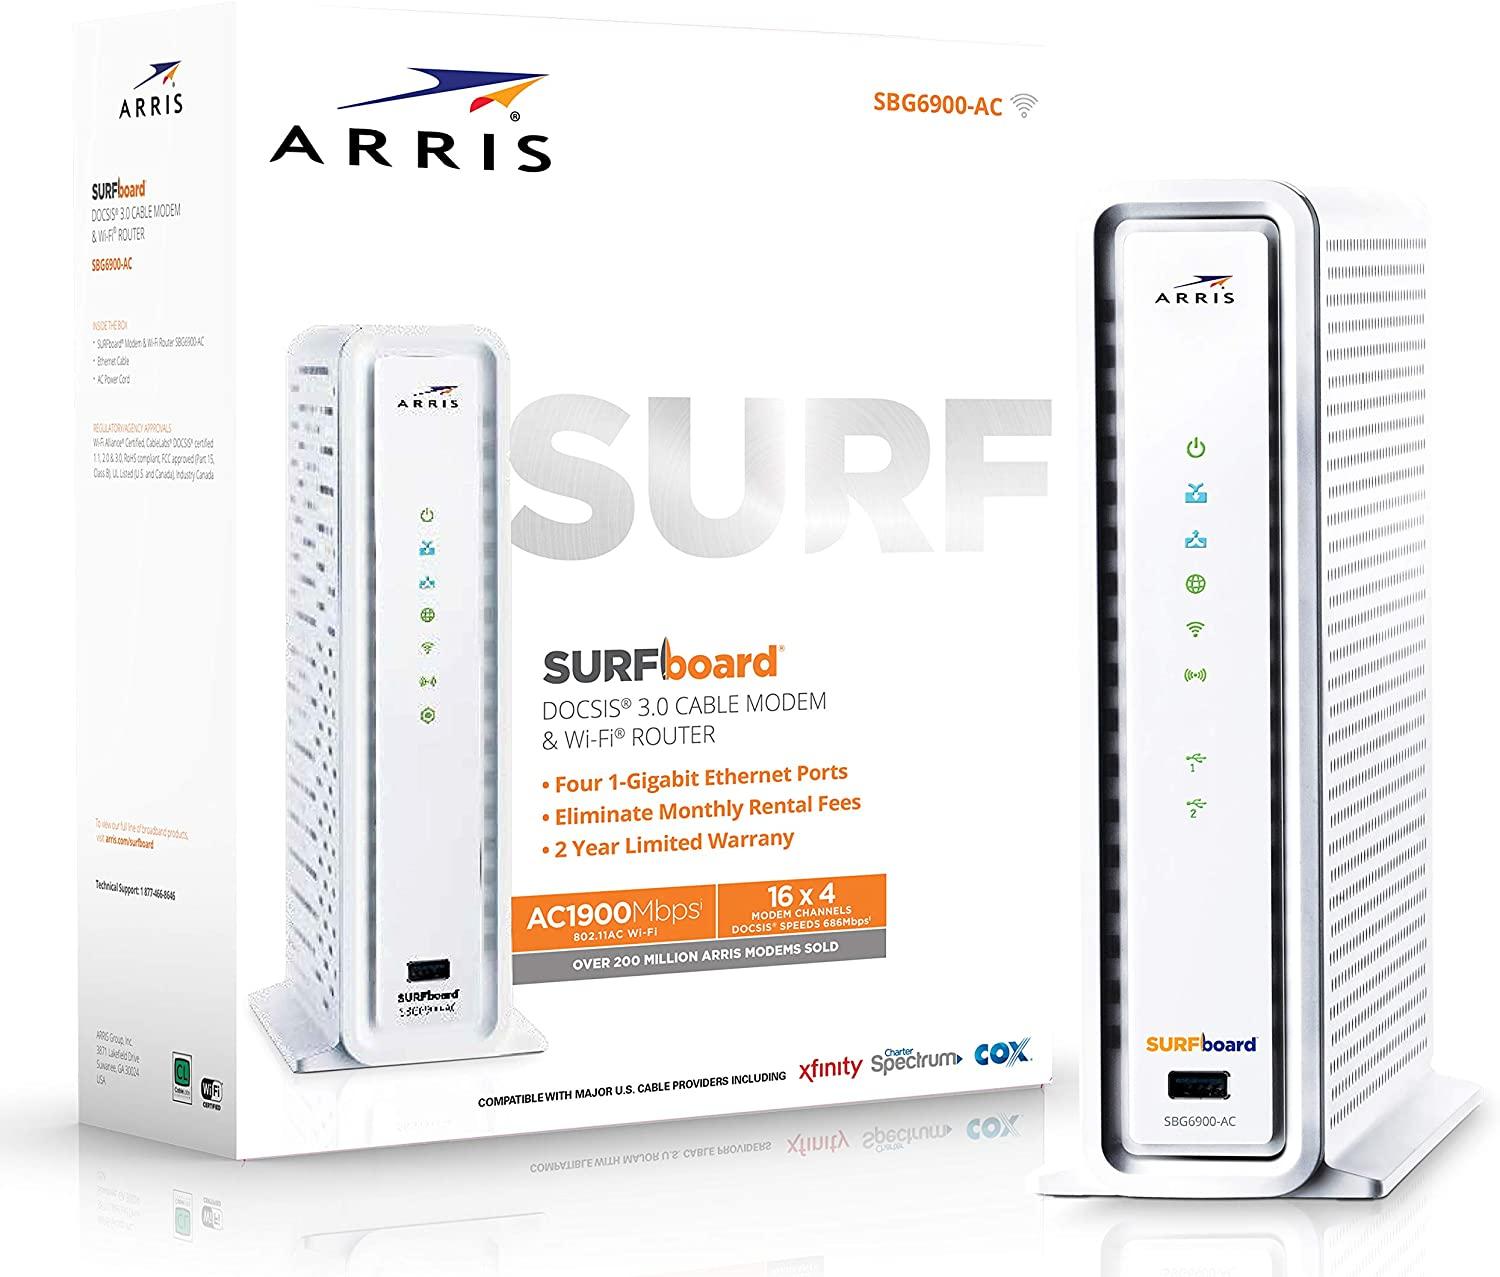 Arris Surfboard SBG6900AC Docsis 3.0 Cable Modem for $52.74 Shipped